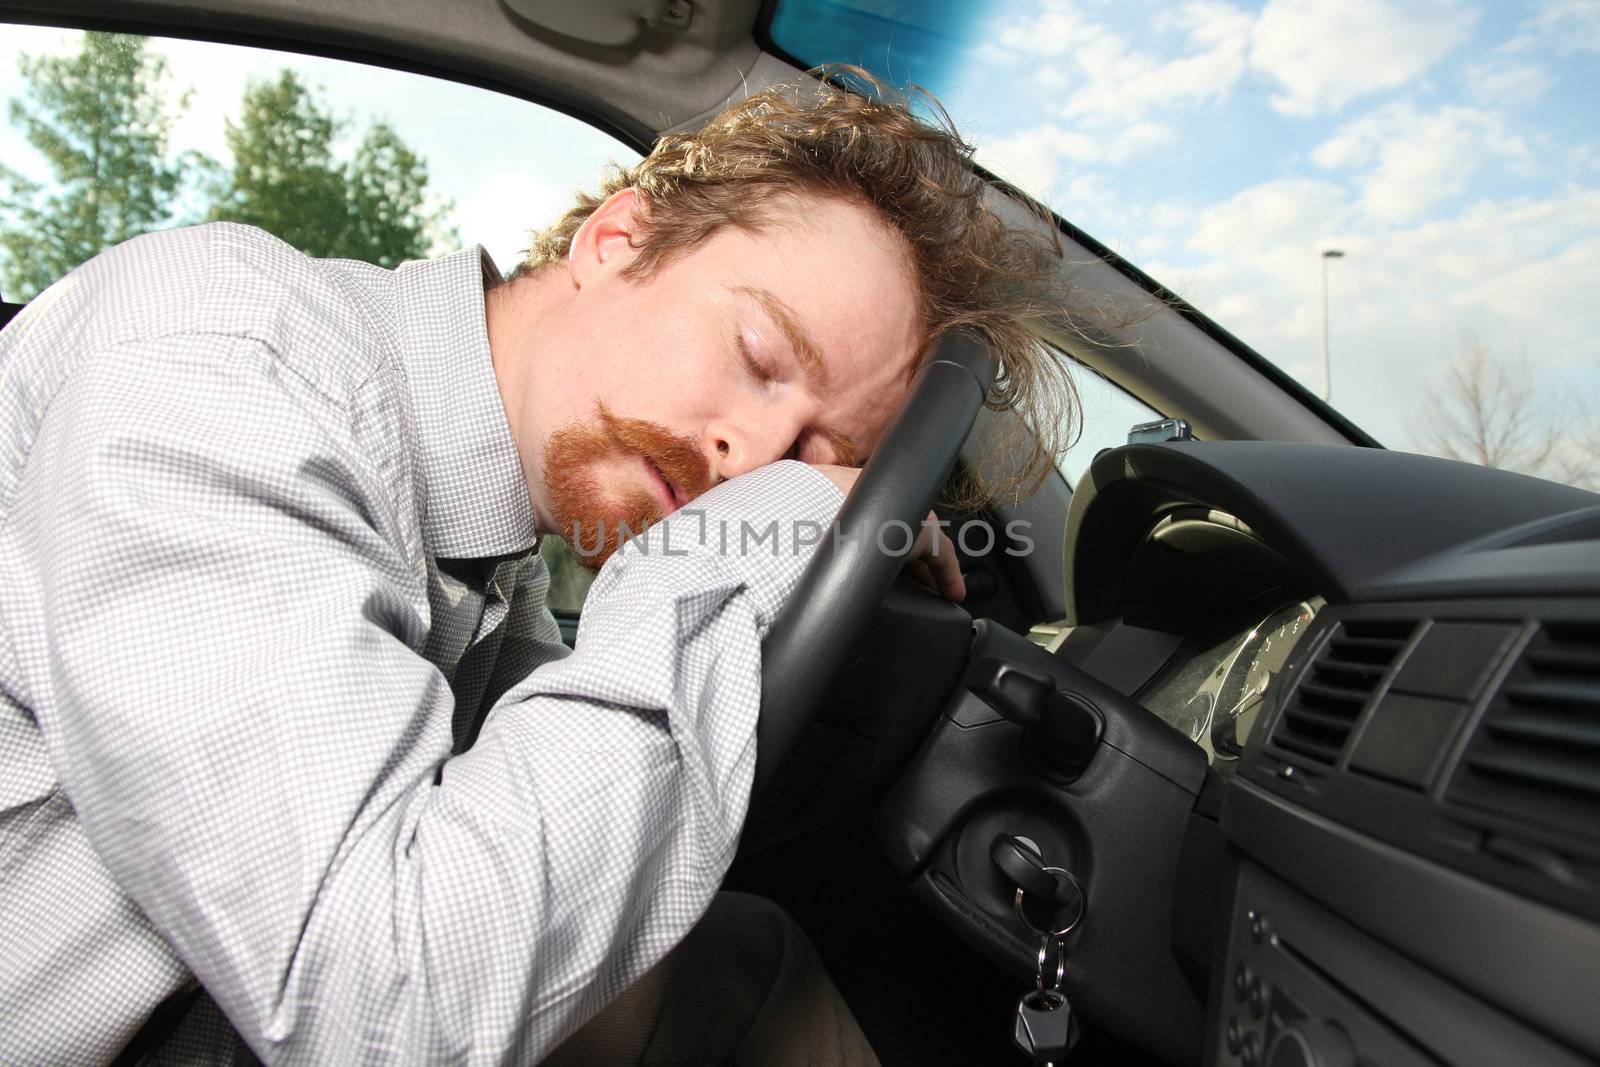 tired driver sleeps in a car